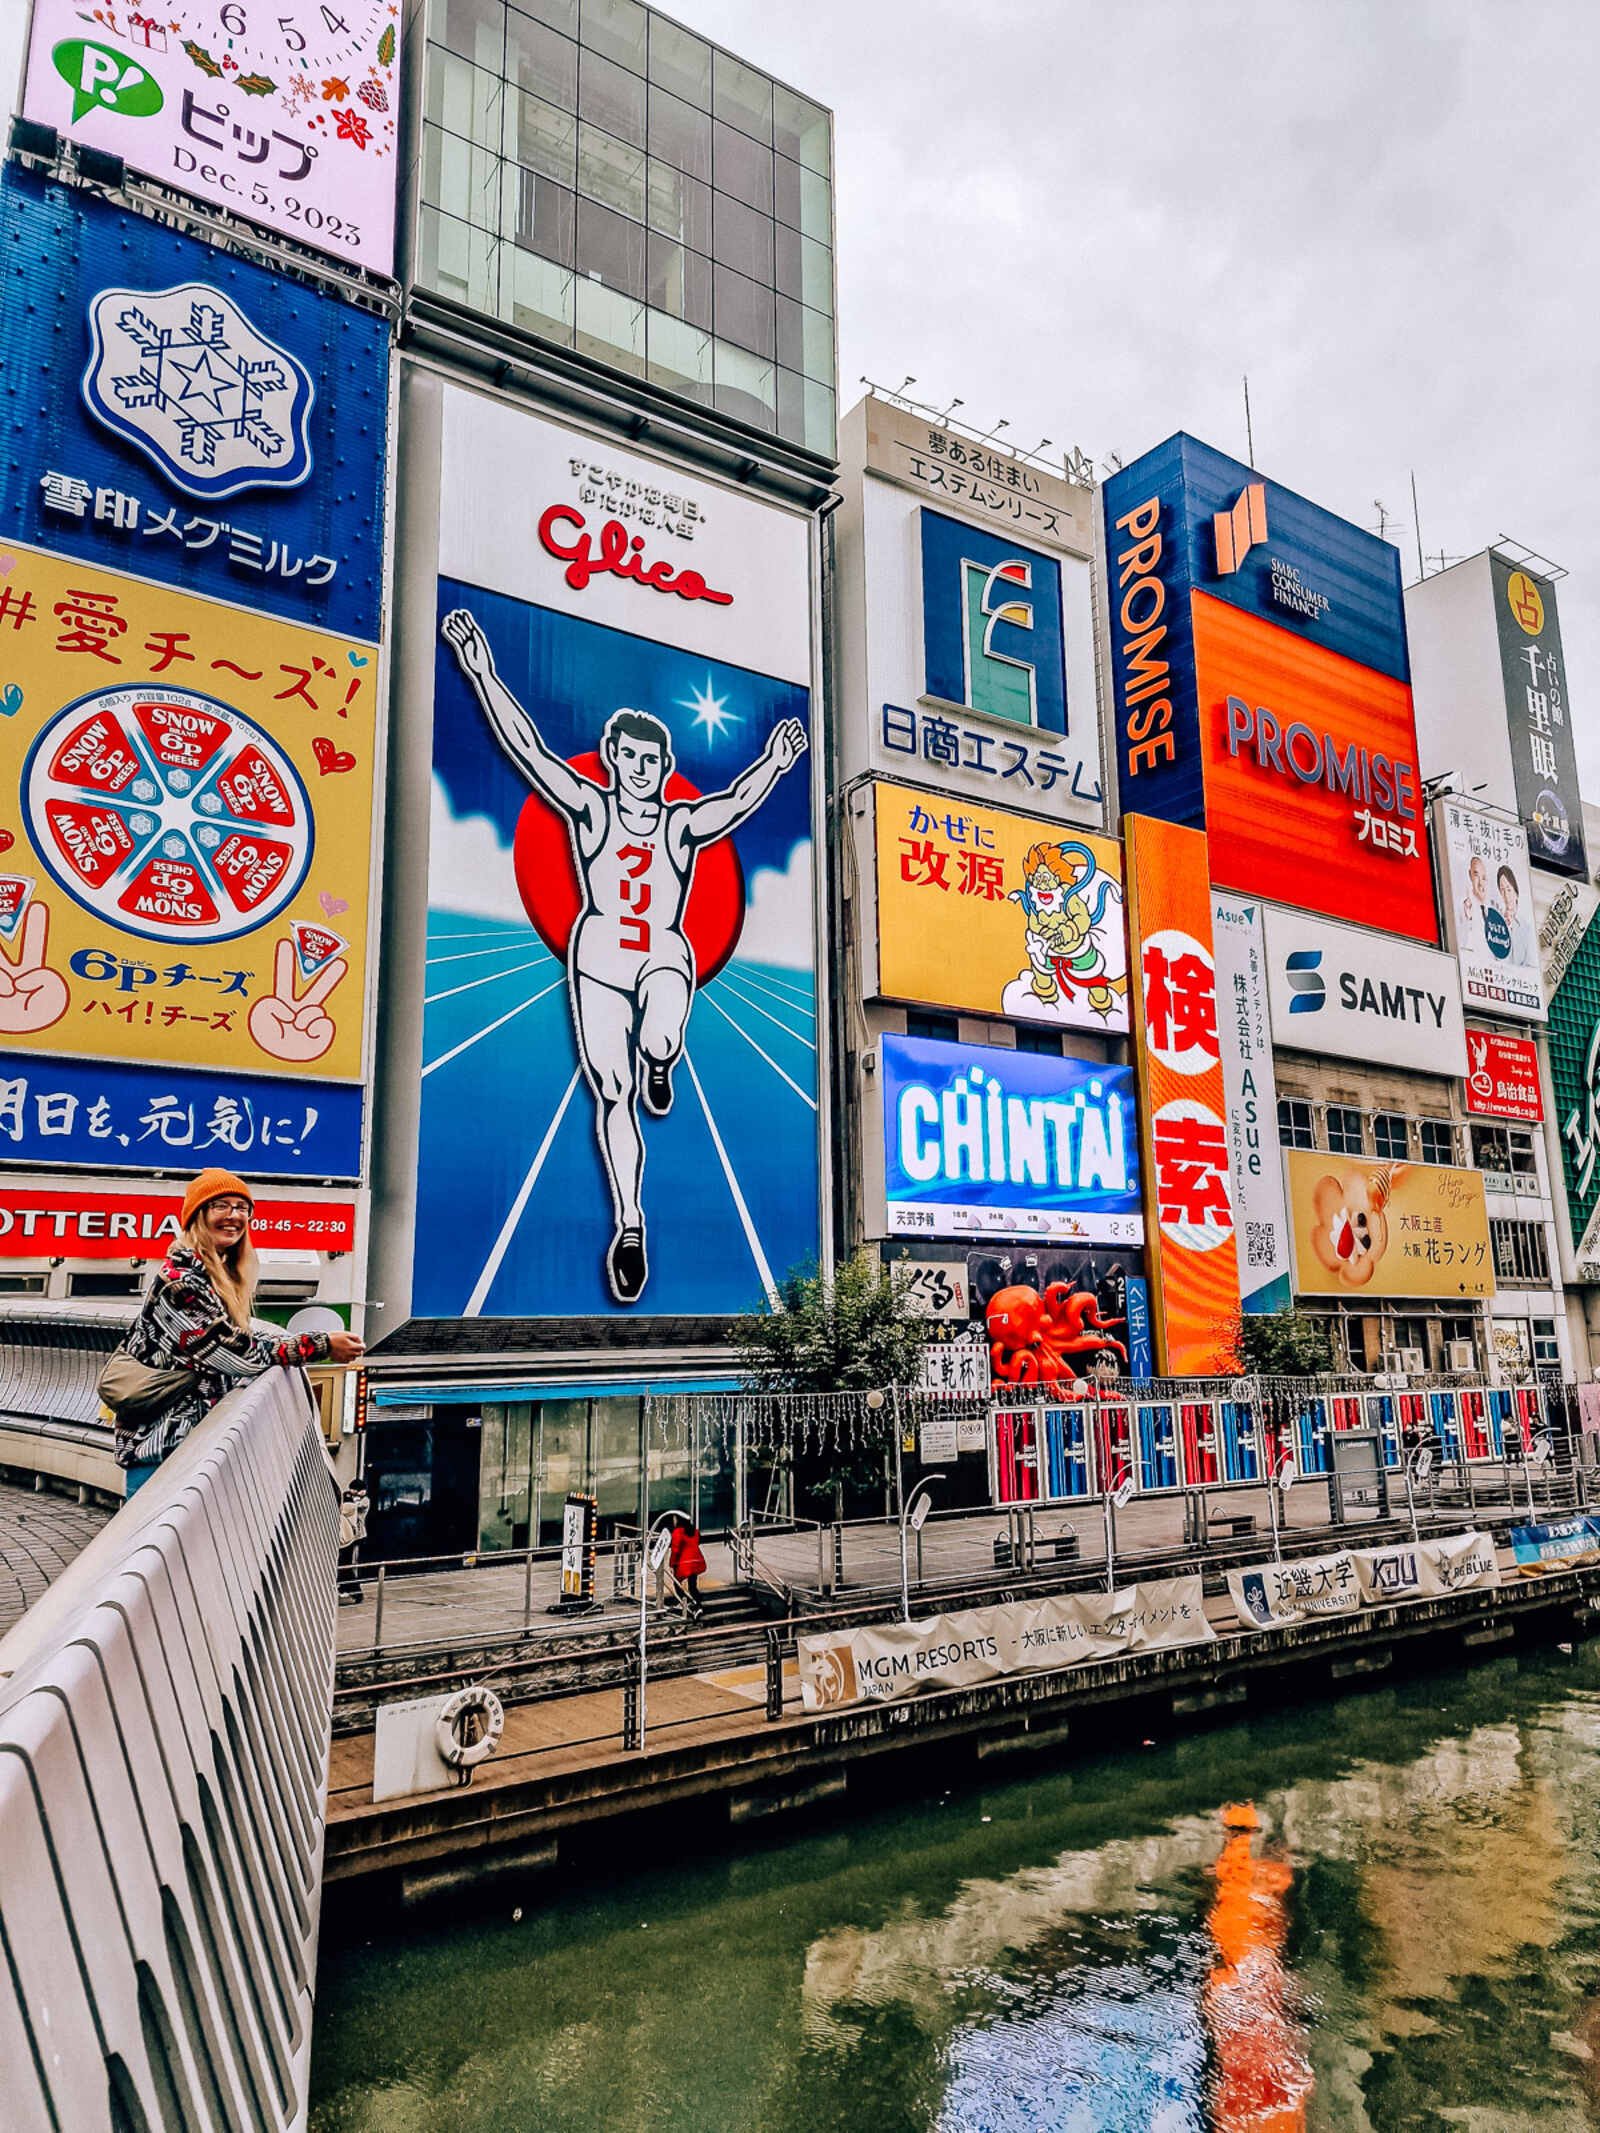 Daytime with lots of colourful adverts and billboards on the side of buildings along a river including a large portrait of a running man with his arms in the air - this is the osaka glico running man sign